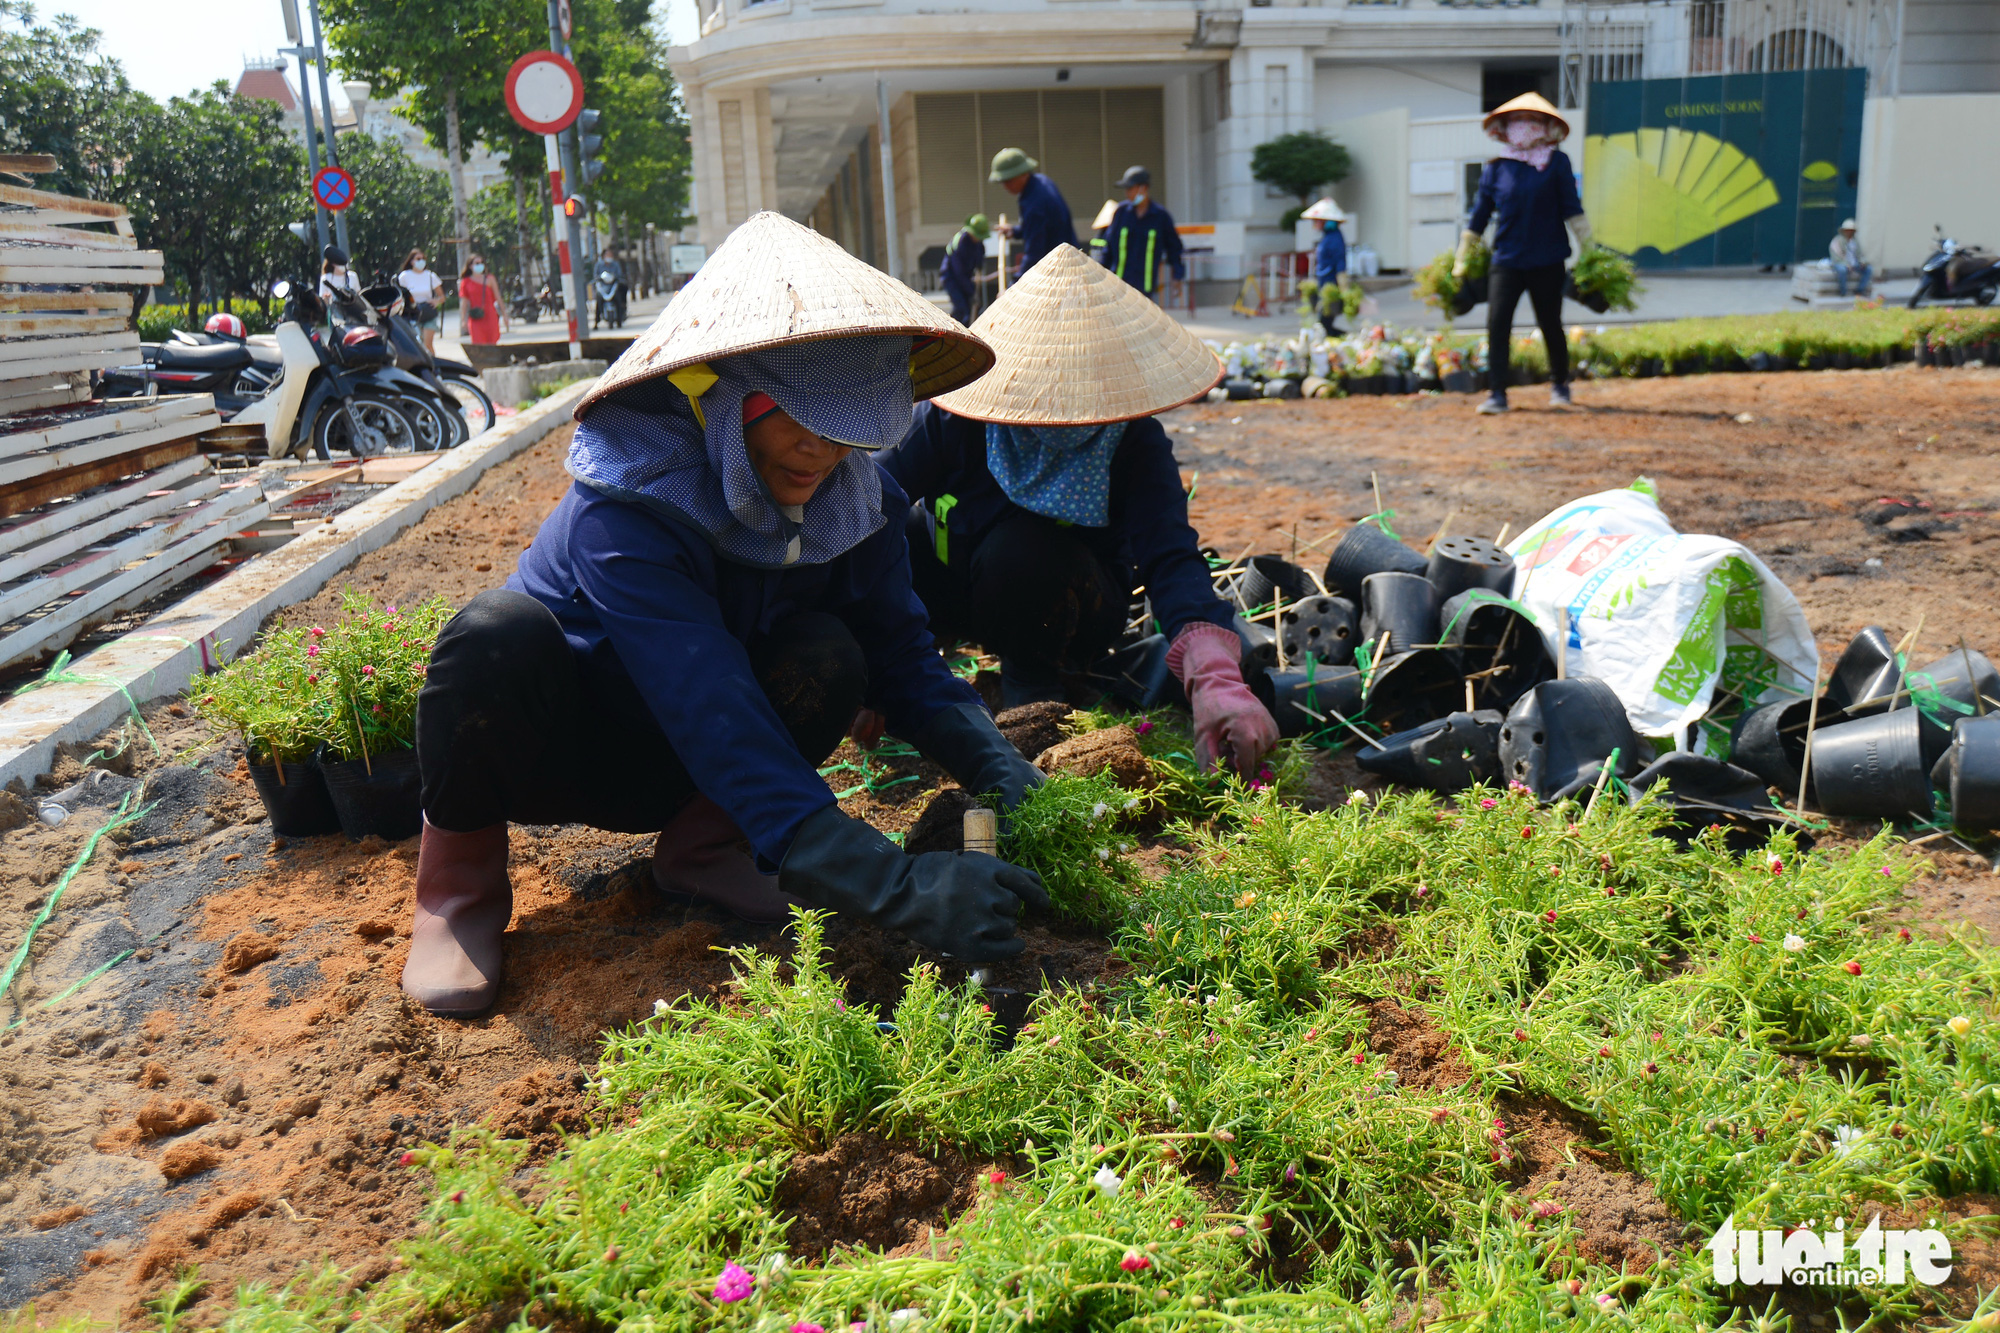 Flowers are being planted in the area. Photo: Quang Dinh / Tuoi Tre